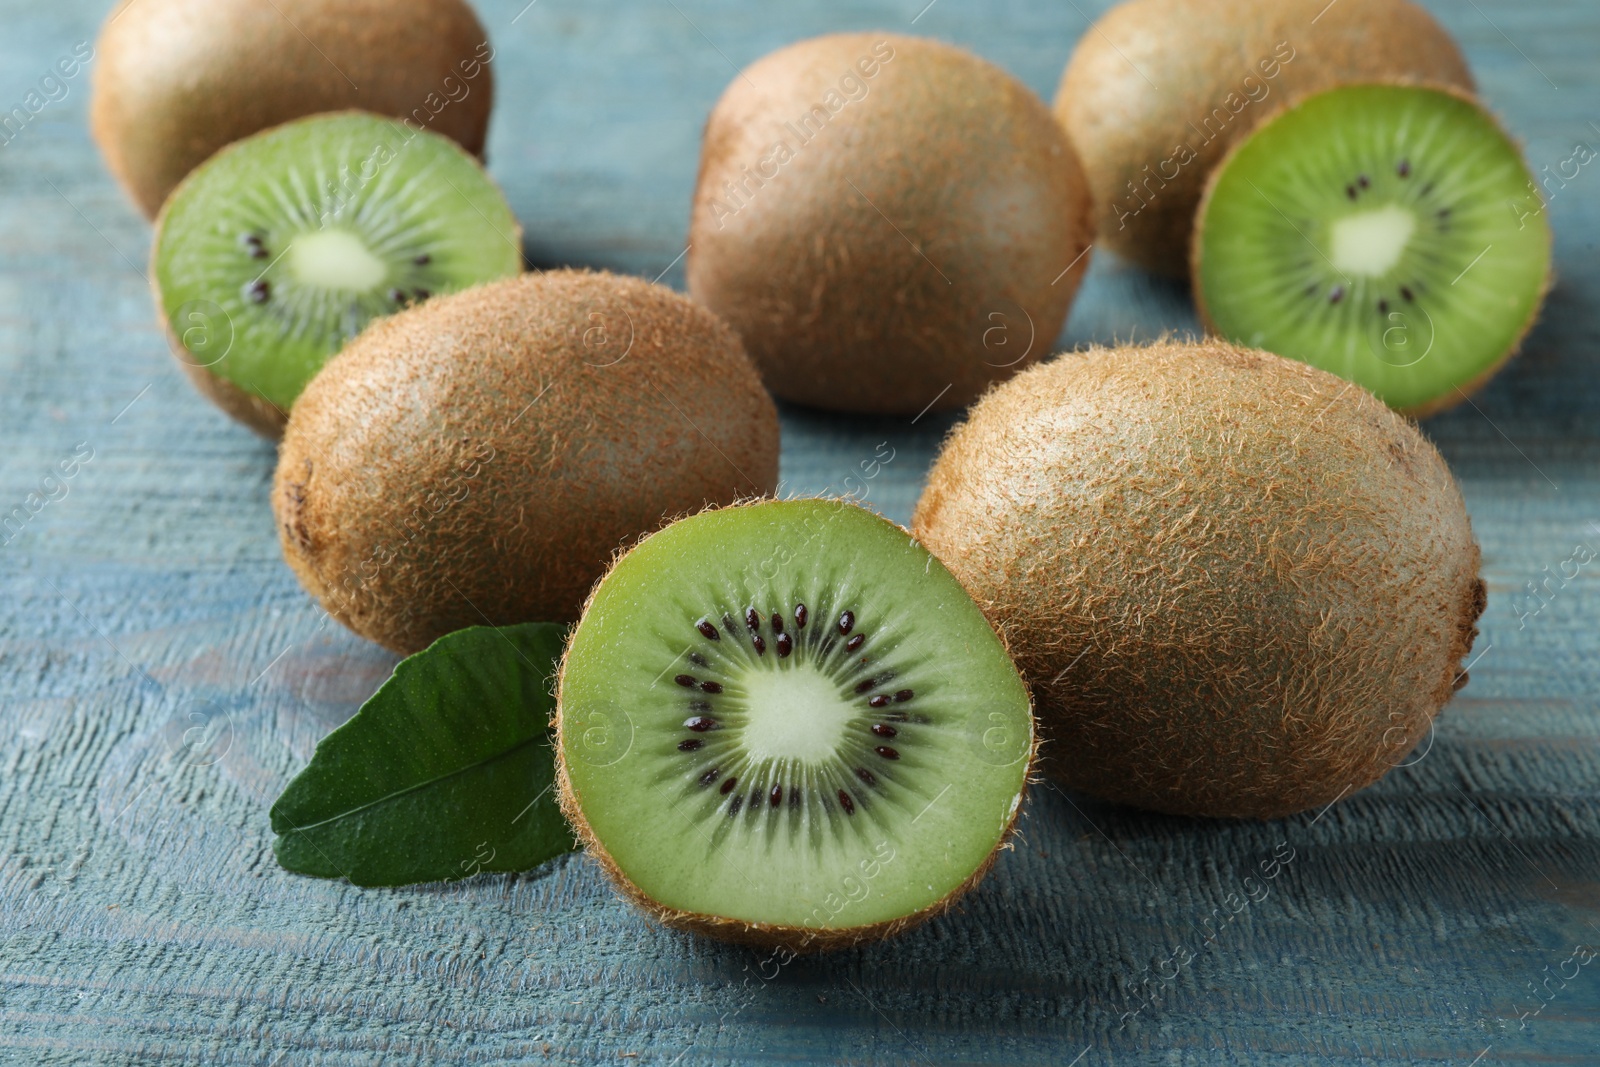 Photo of Cut and whole fresh ripe kiwis on light blue wooden table, closeup